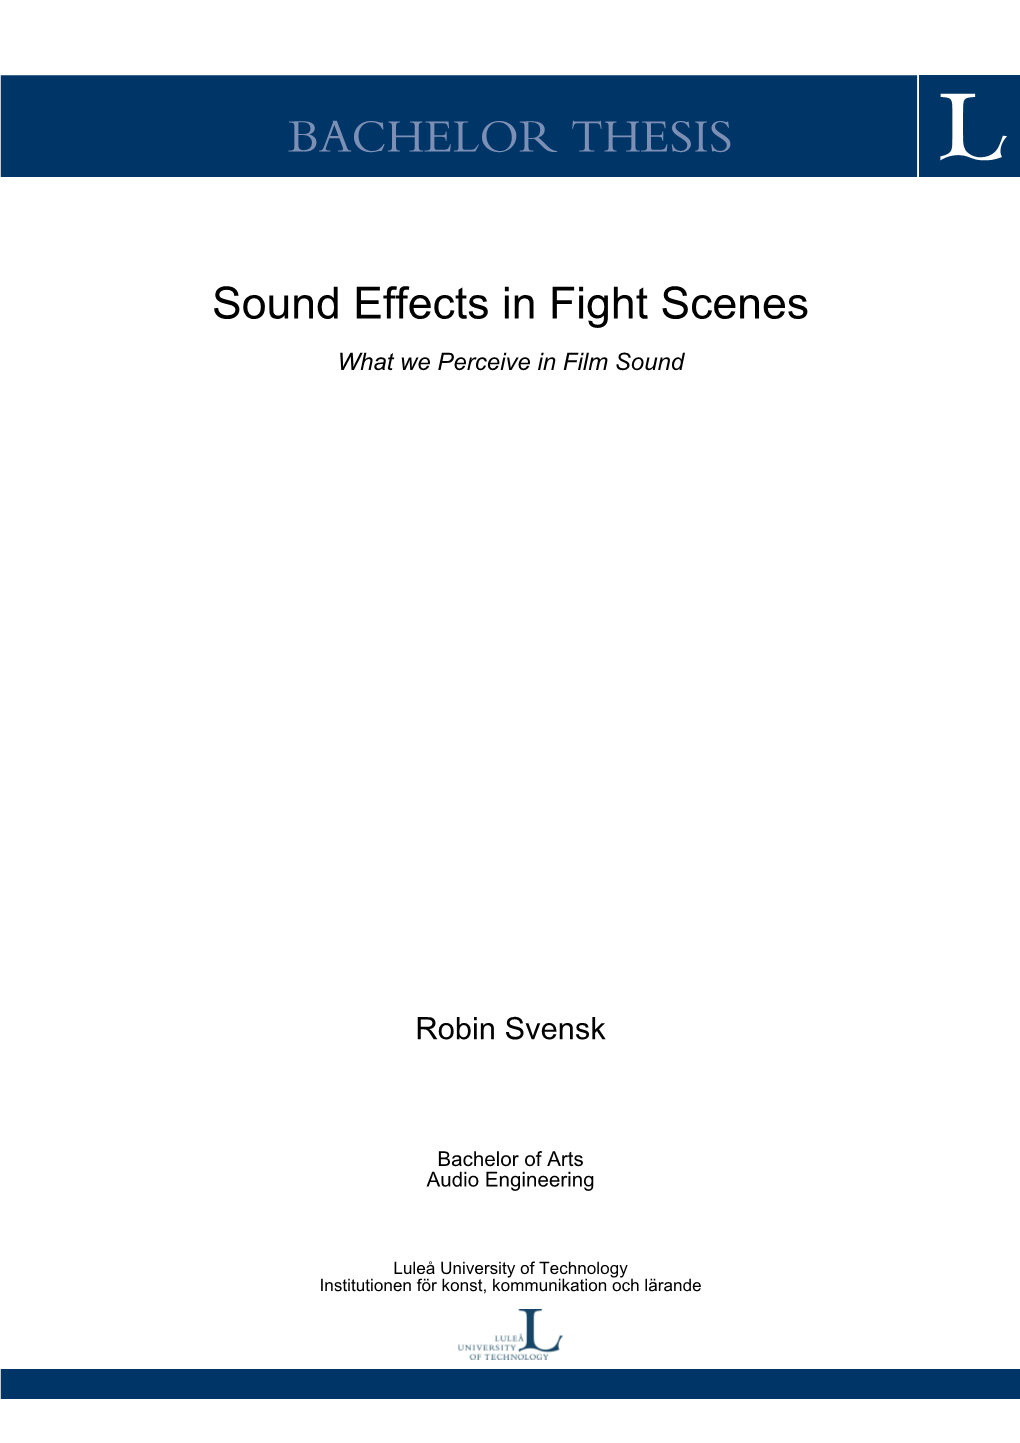 Sound Effects in Fight Scenes What We Perceive in Film Sound